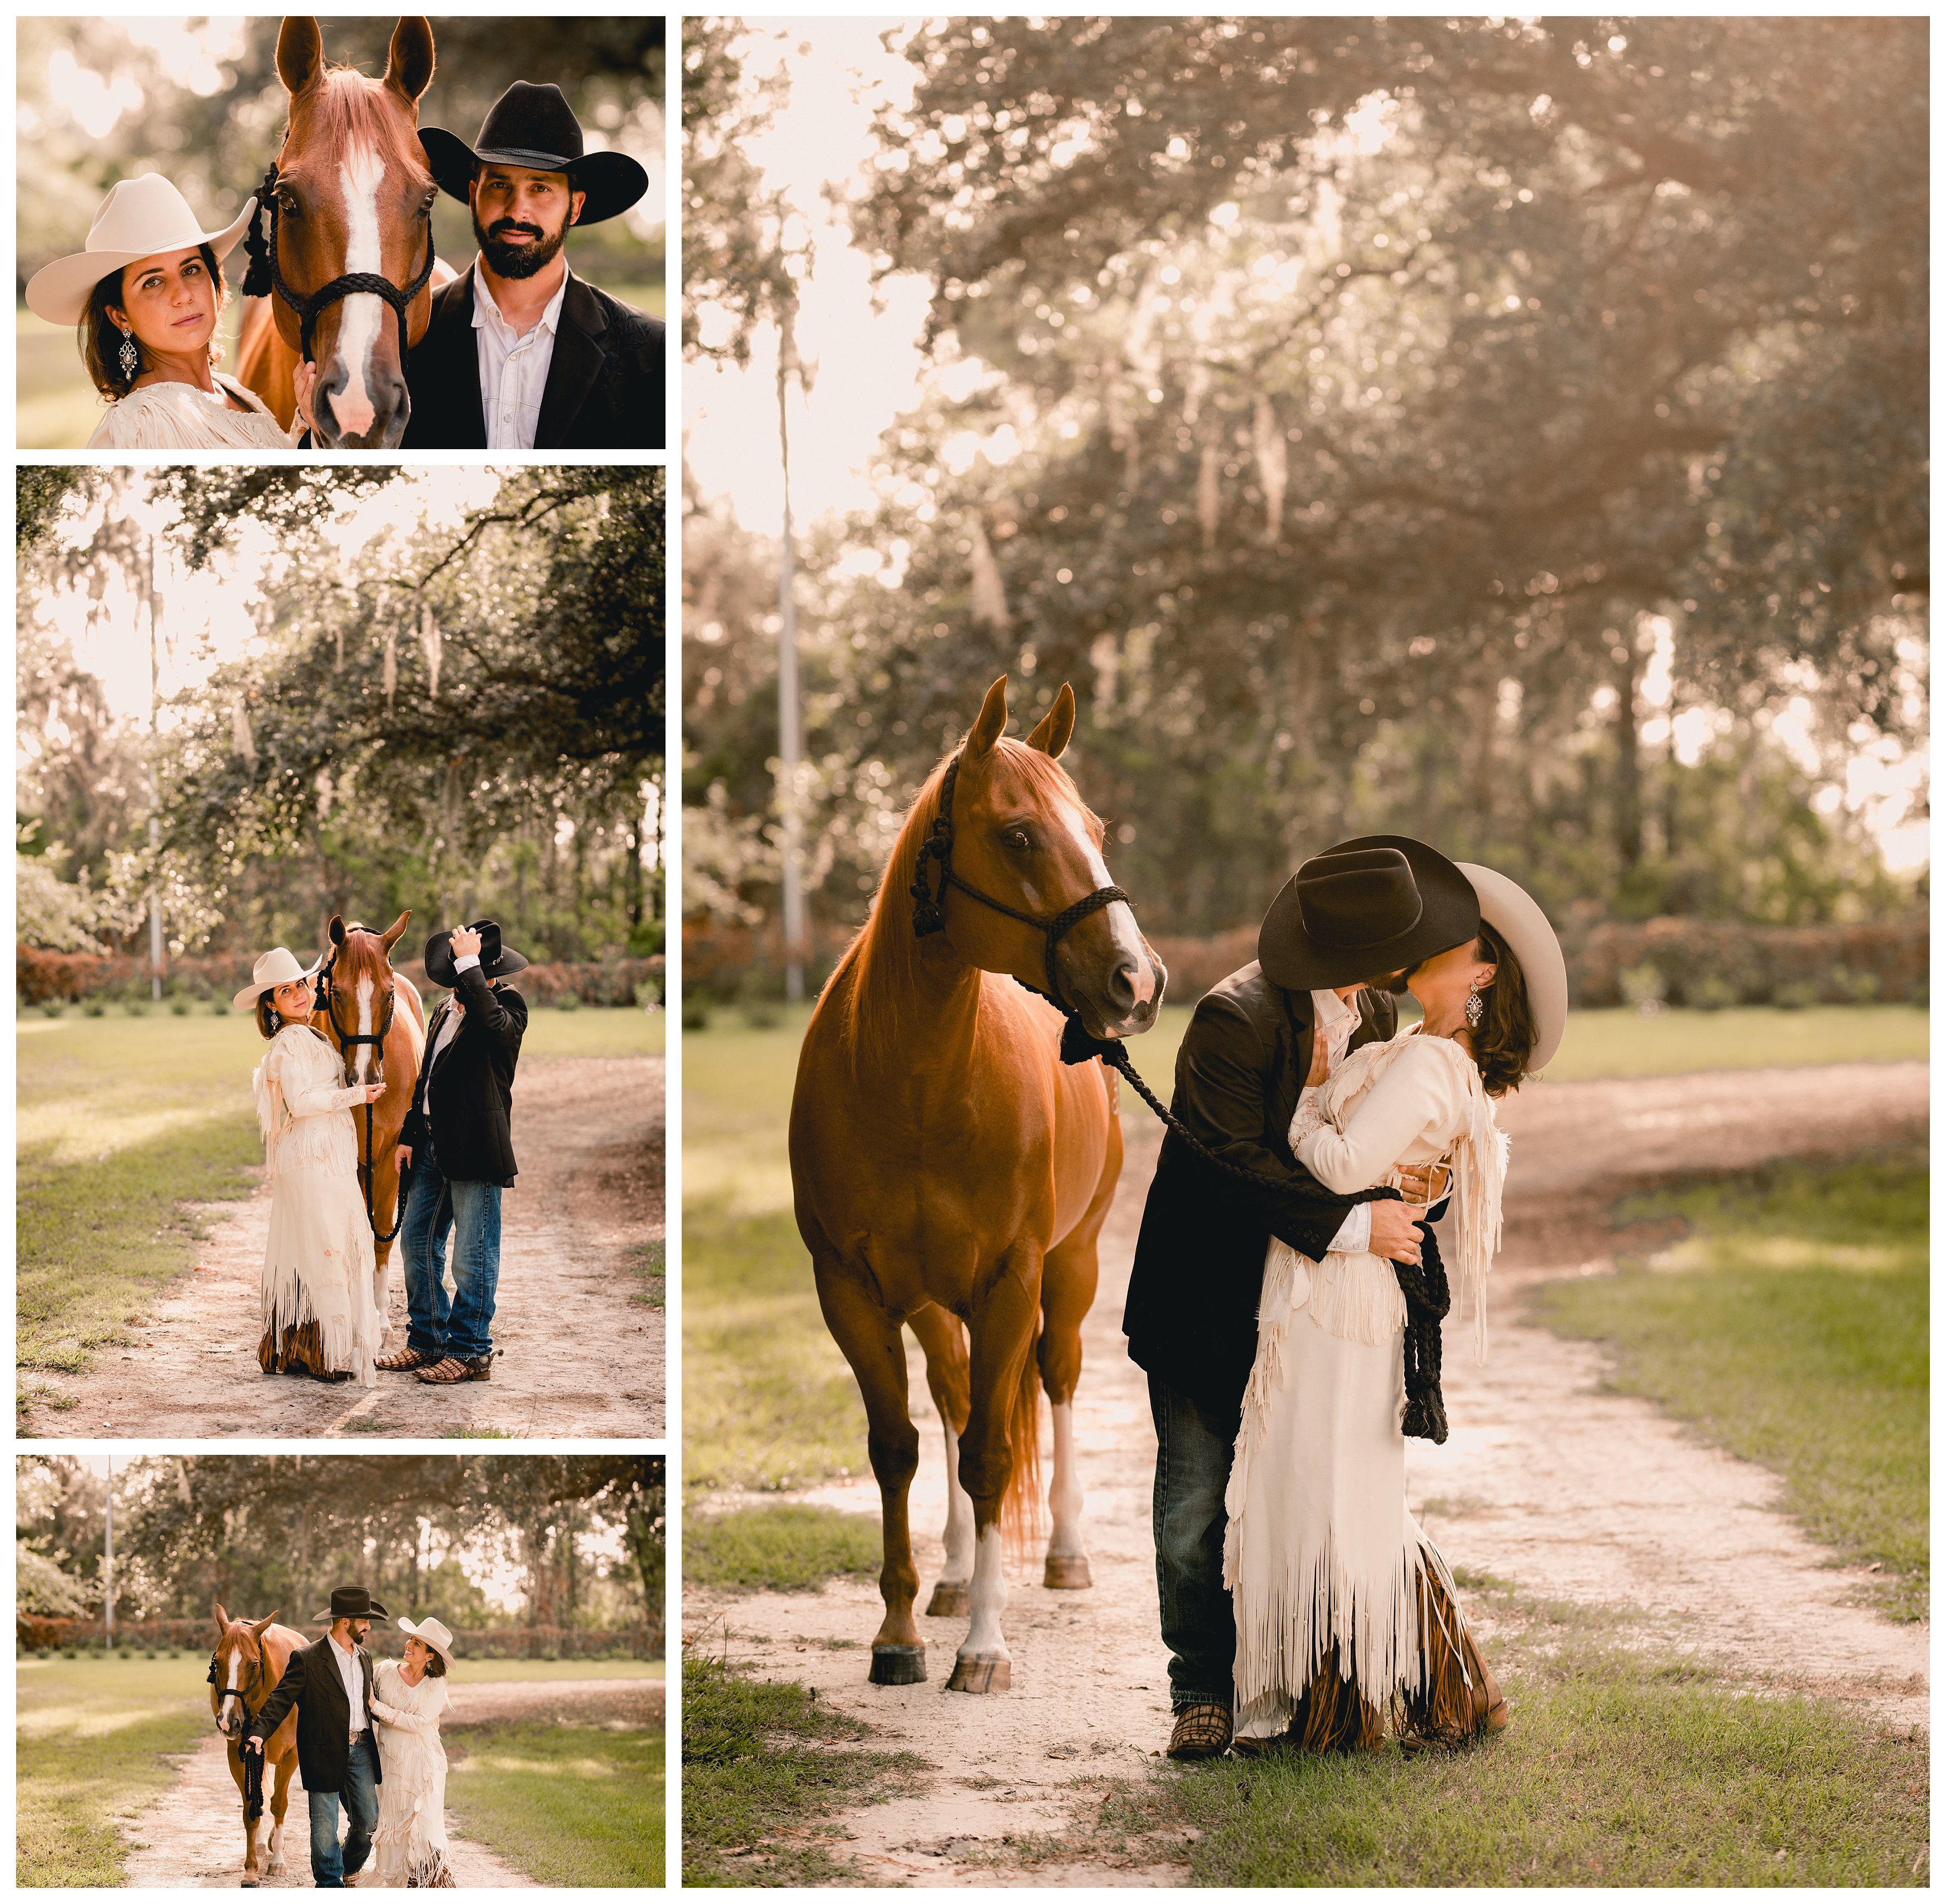 Wedding couple wearing western fashionable fringe dress and cowboy hats taken with their horse.